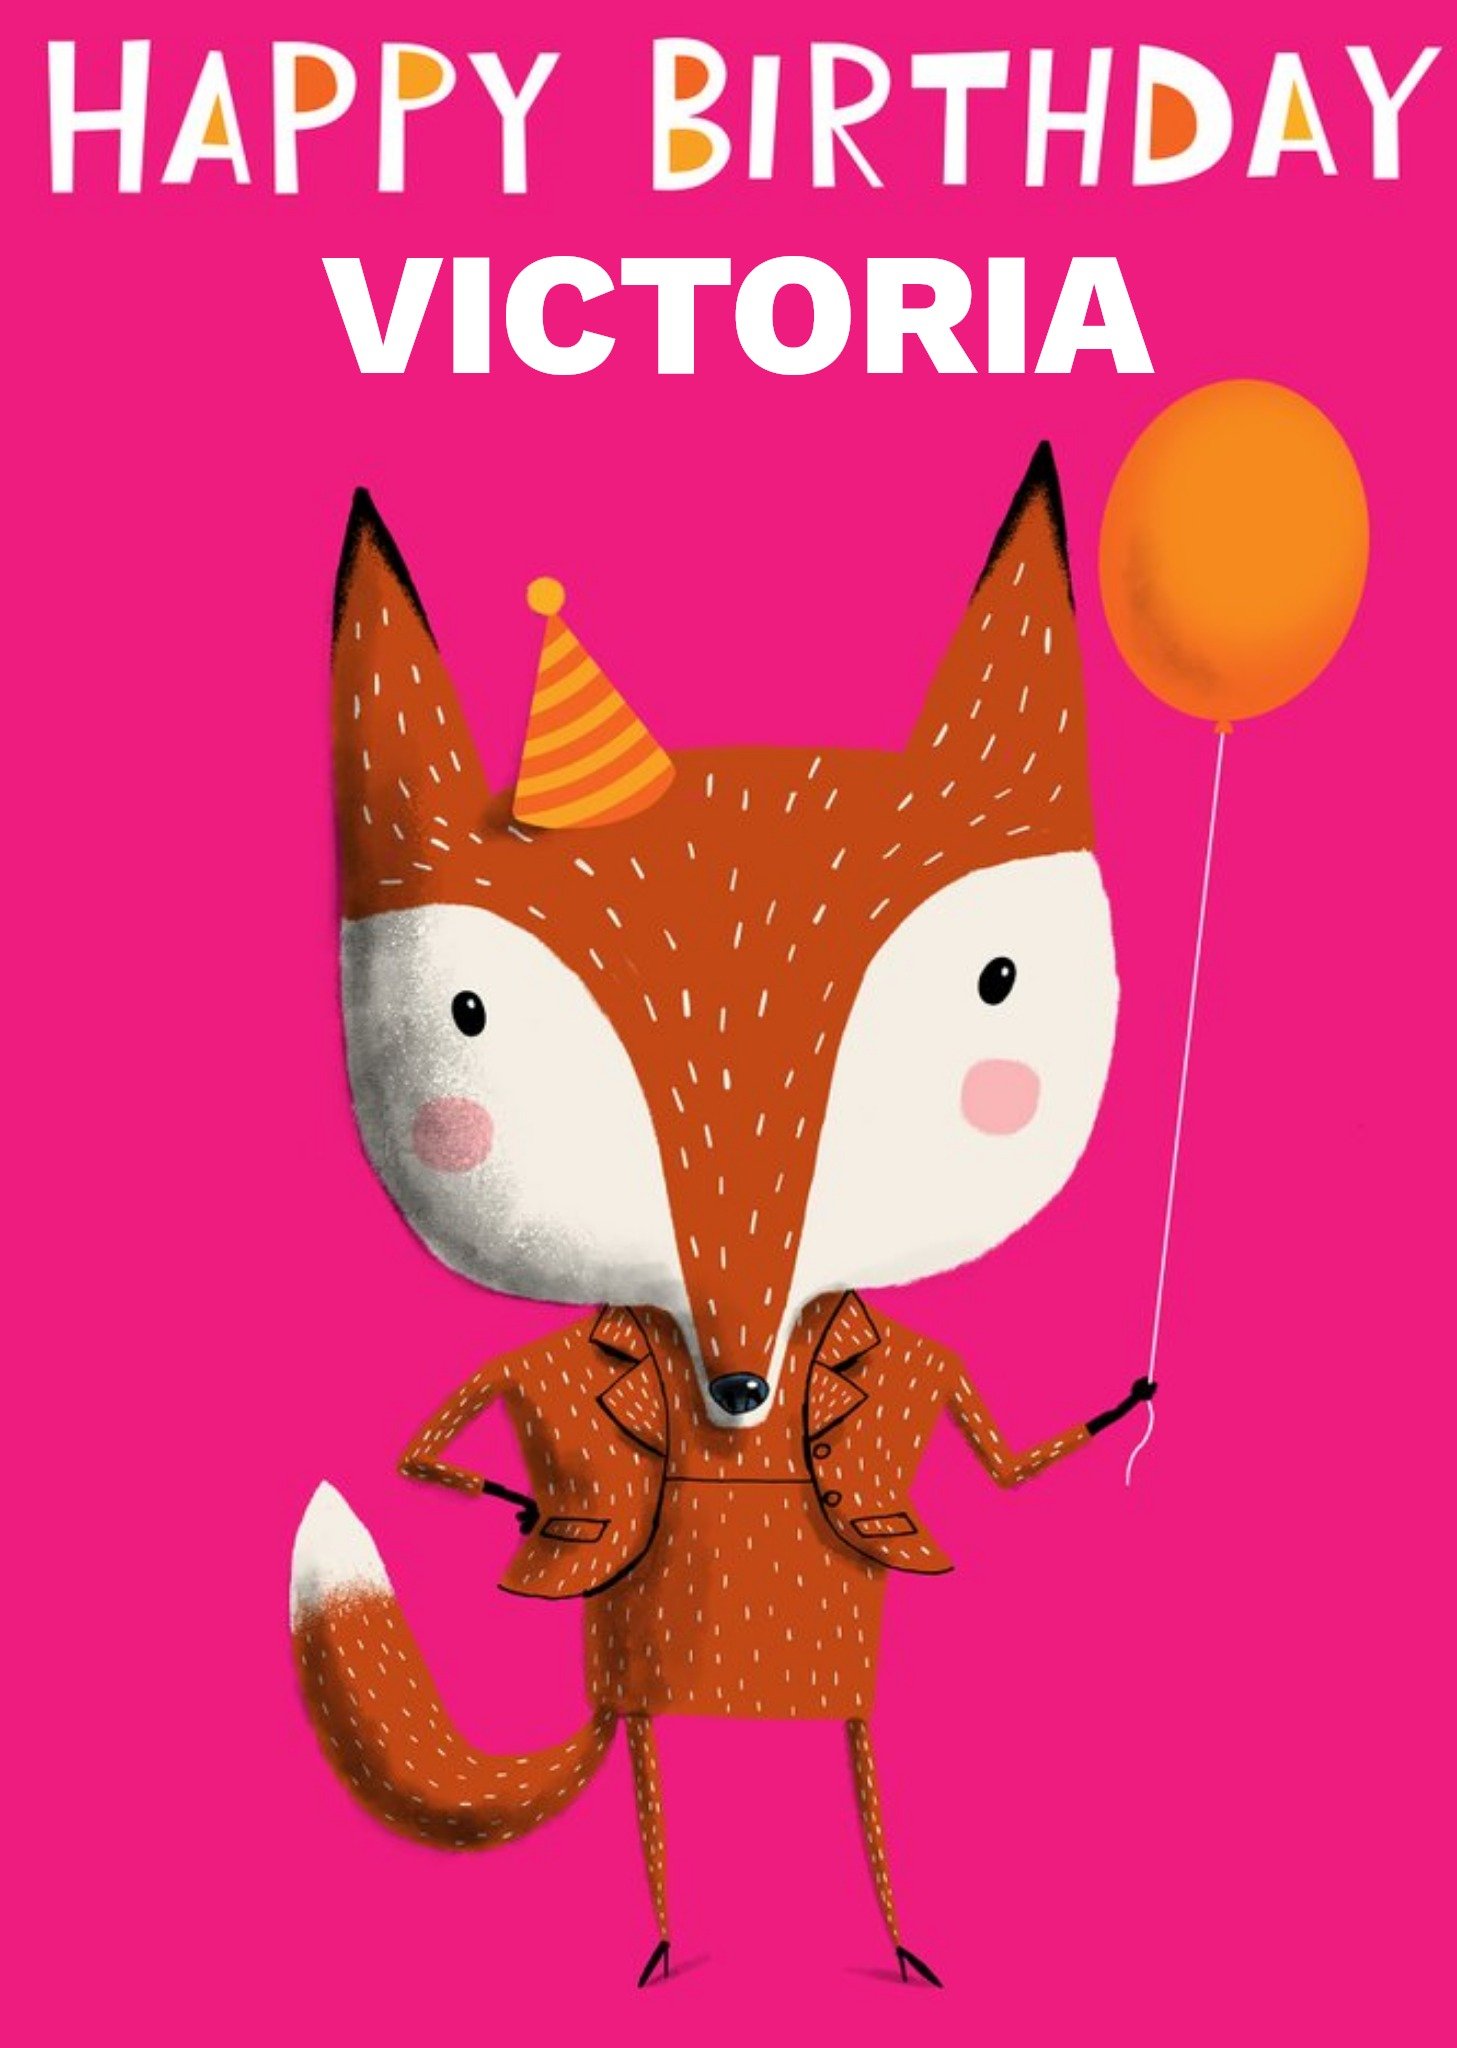 Moonpig Illustration Of A Fox Wearing A Party Hat And Holding A Balloon Birthday Card Ecard